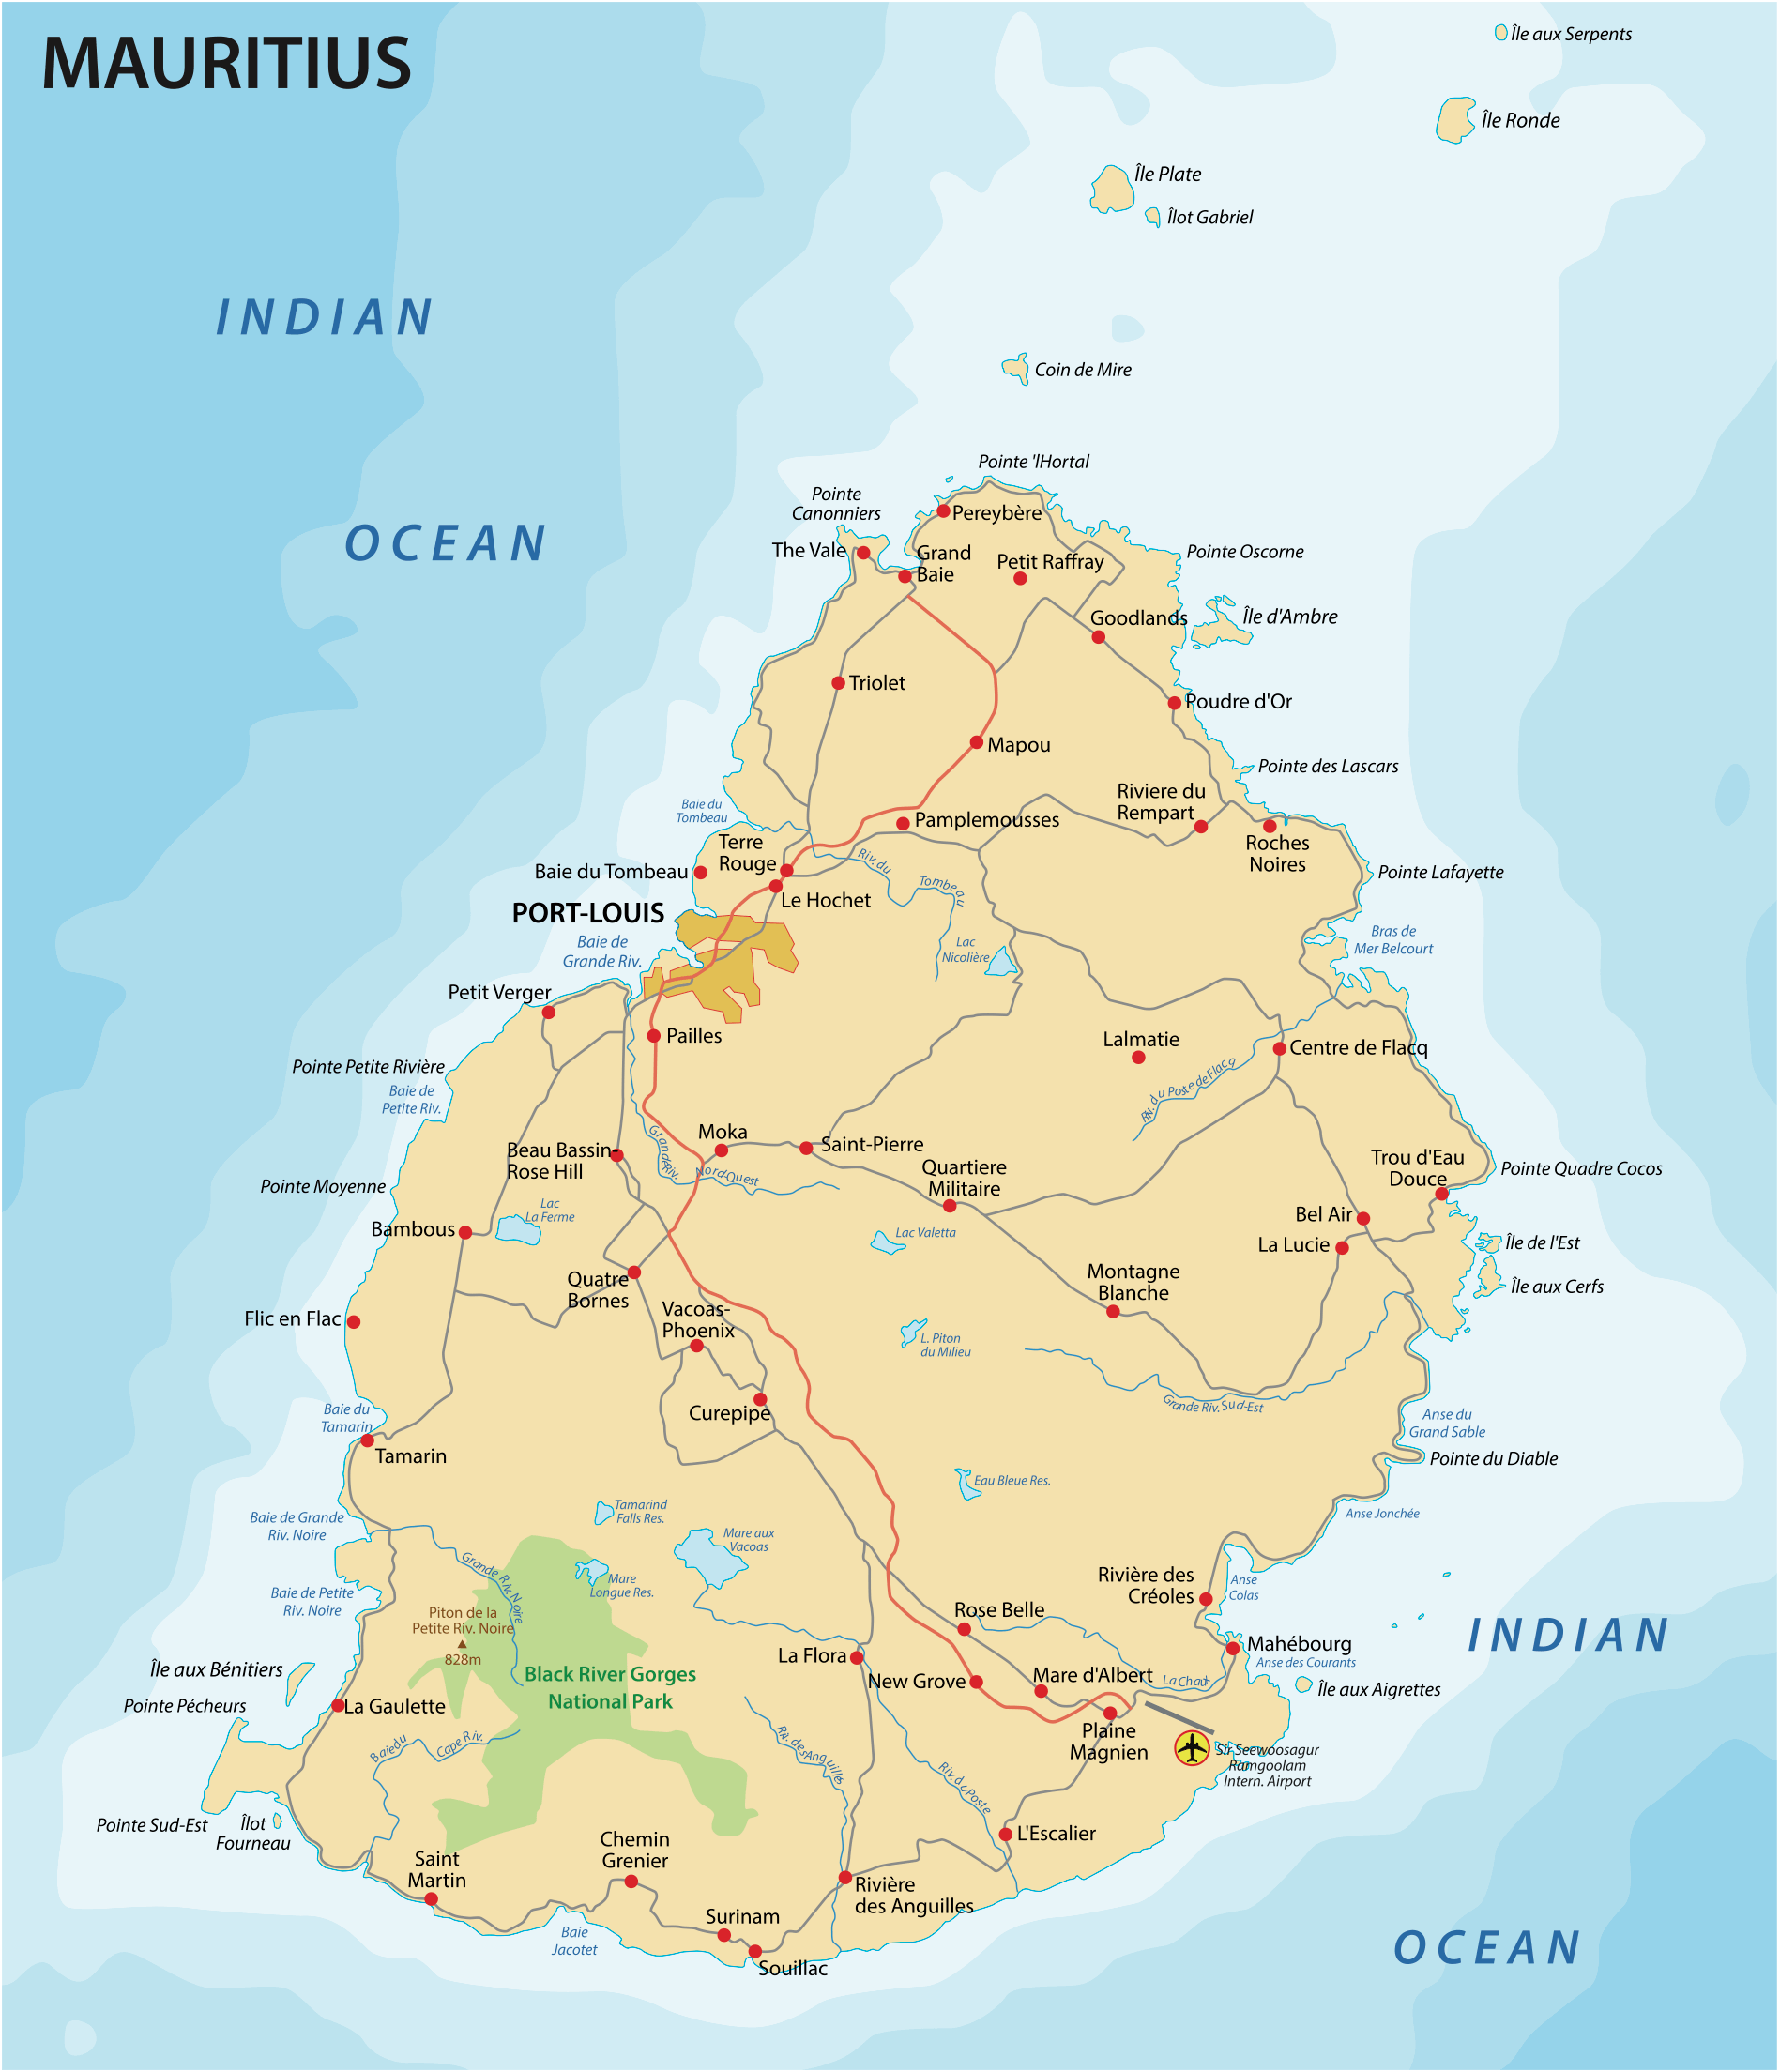 Mauritius Geography Mauritius Landforms Geography People Map